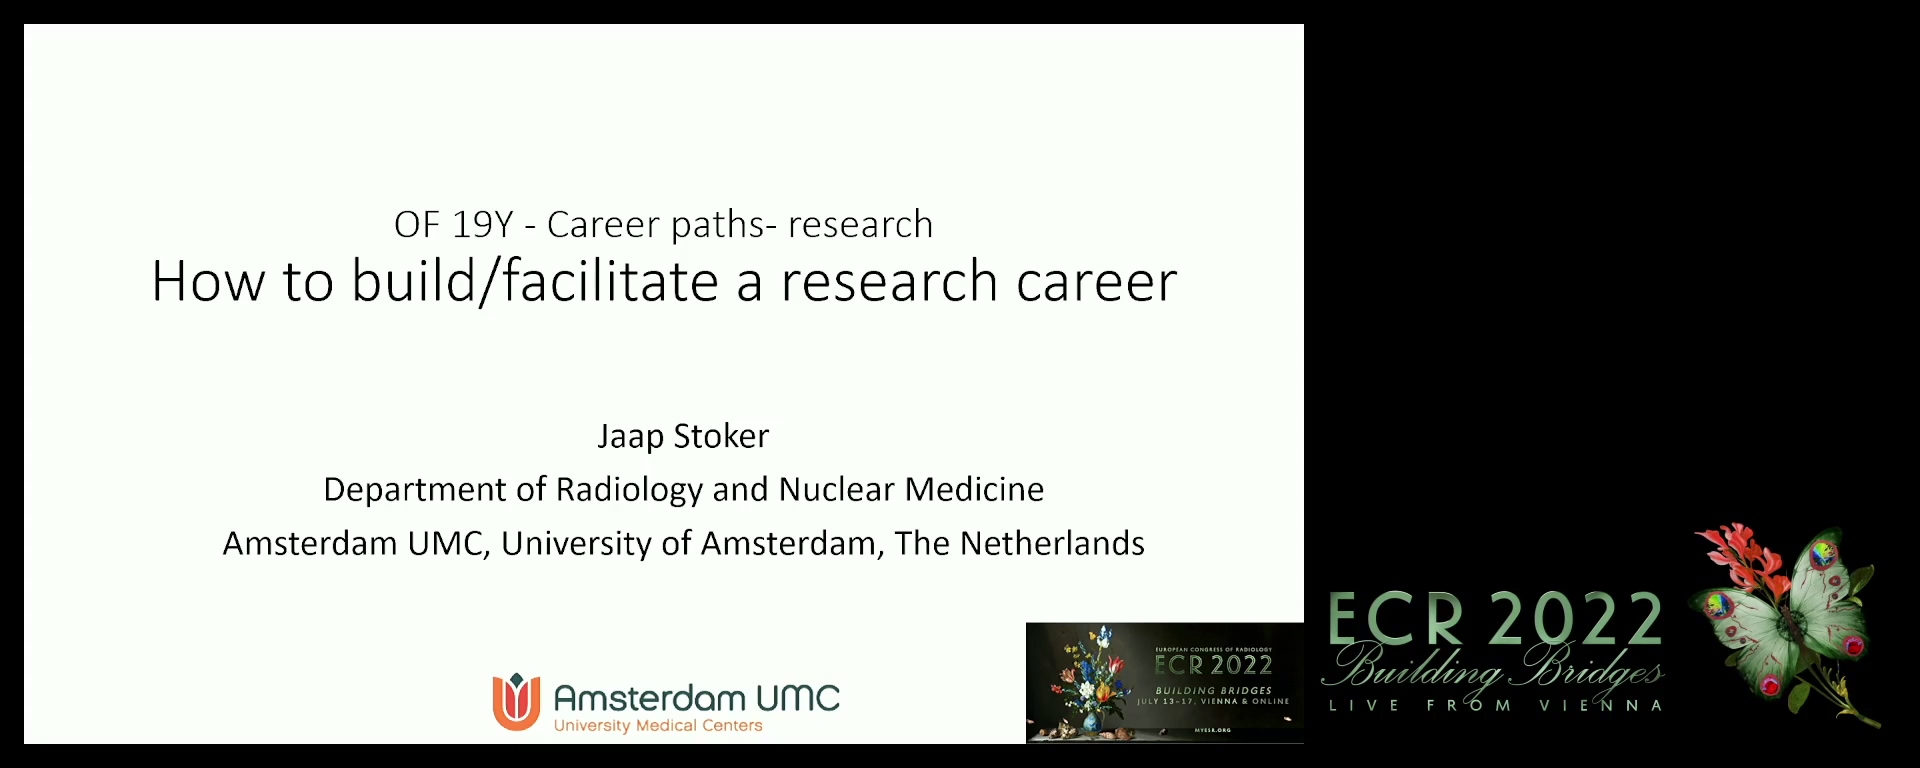 How to build/facilitate a research career